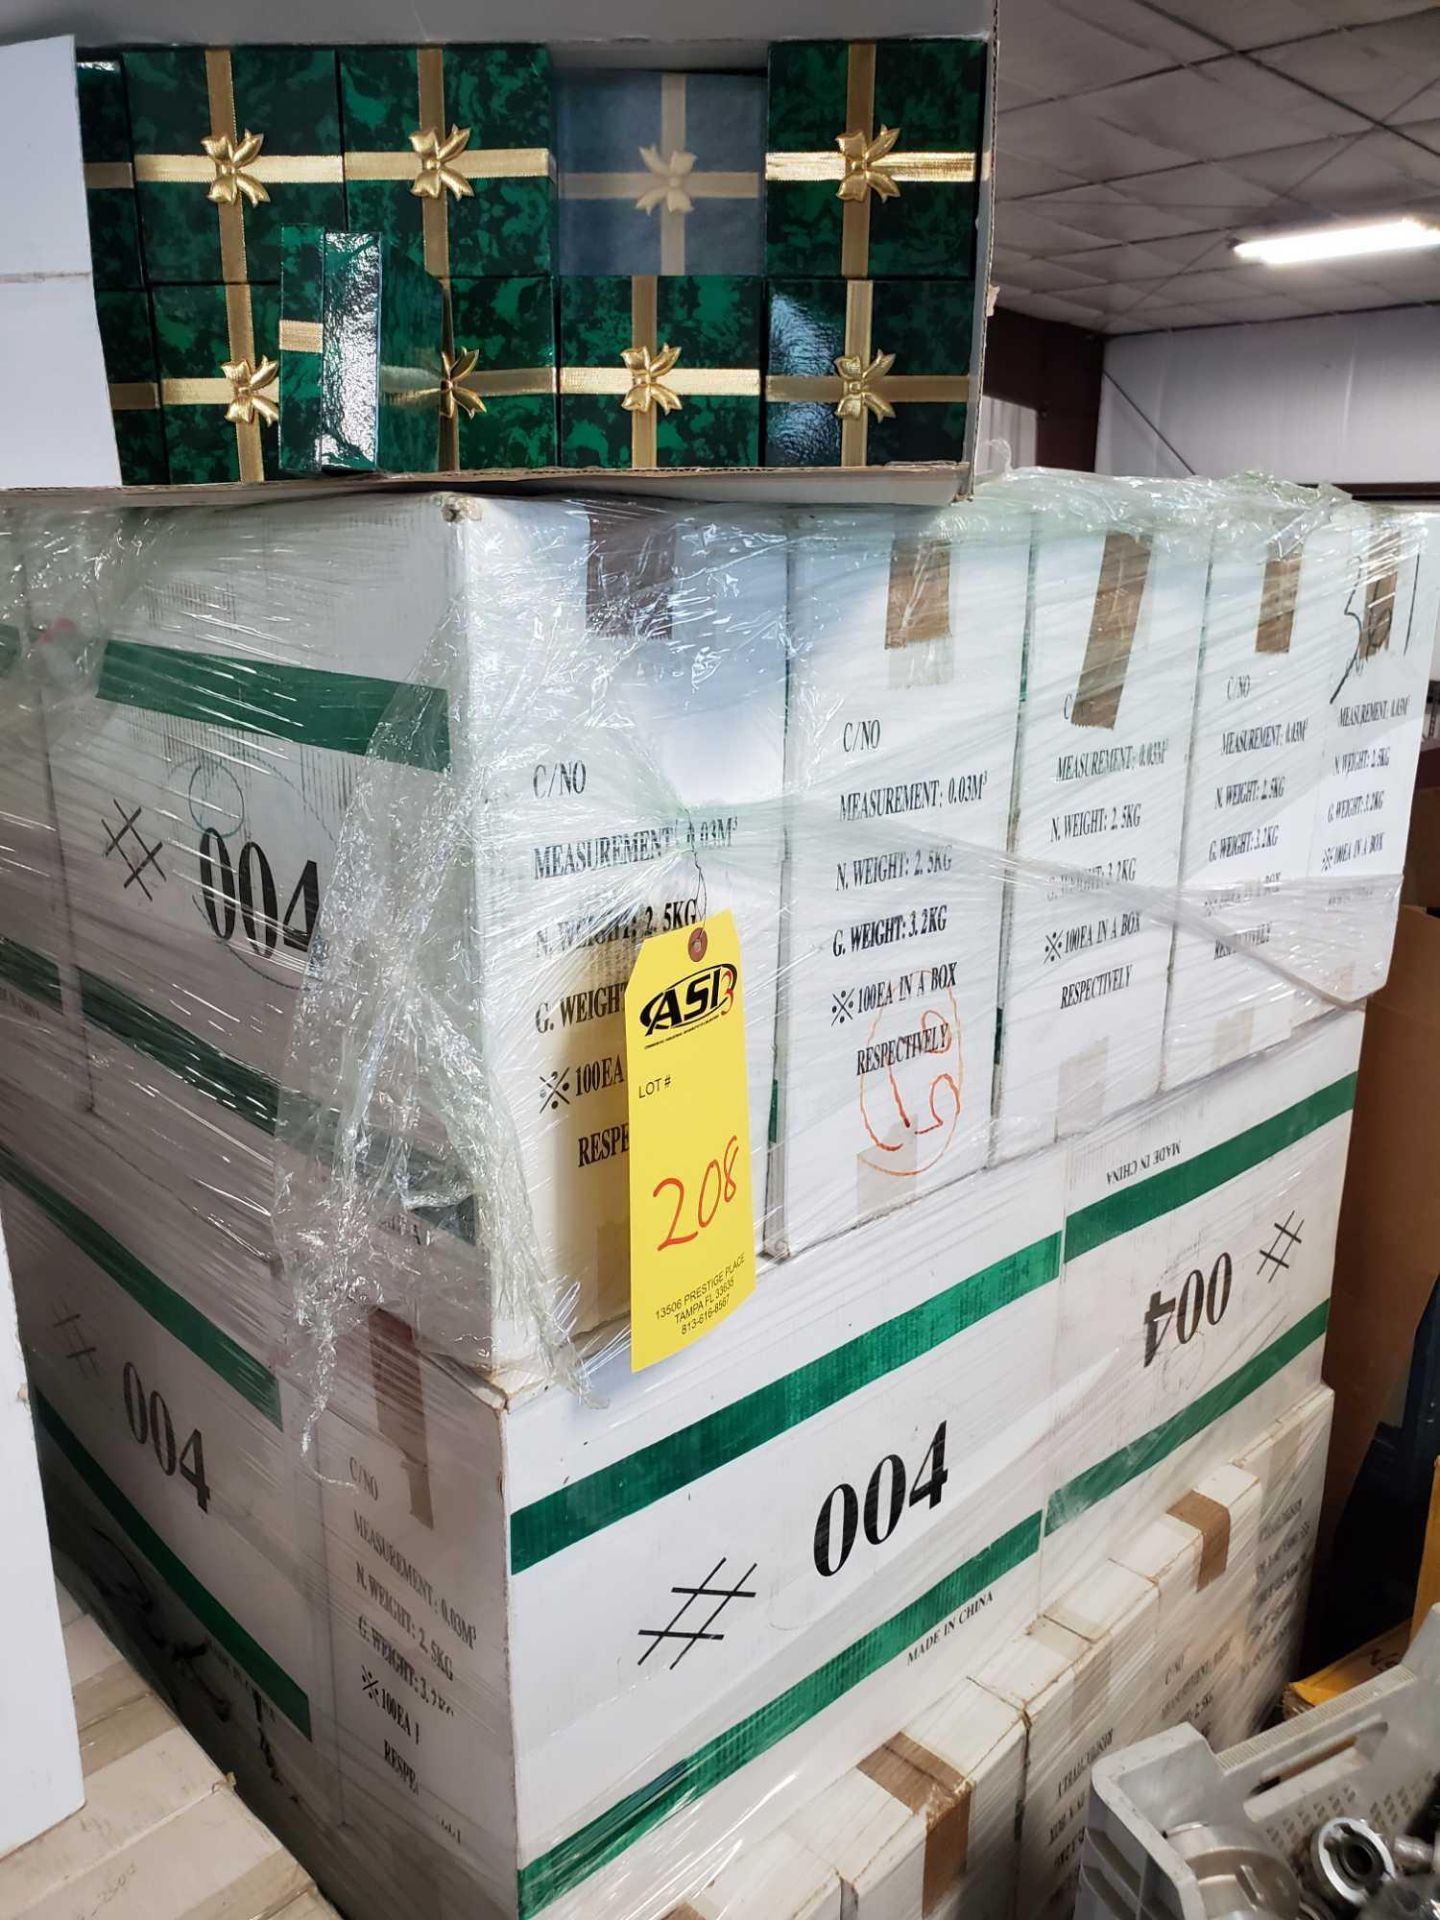 PALLET LOT OF 41 CASES OF 100 BOXES PER CASE 3.5"X3.5"X1.5" GREEN MARBLE PRINT W GOLD RIBBON